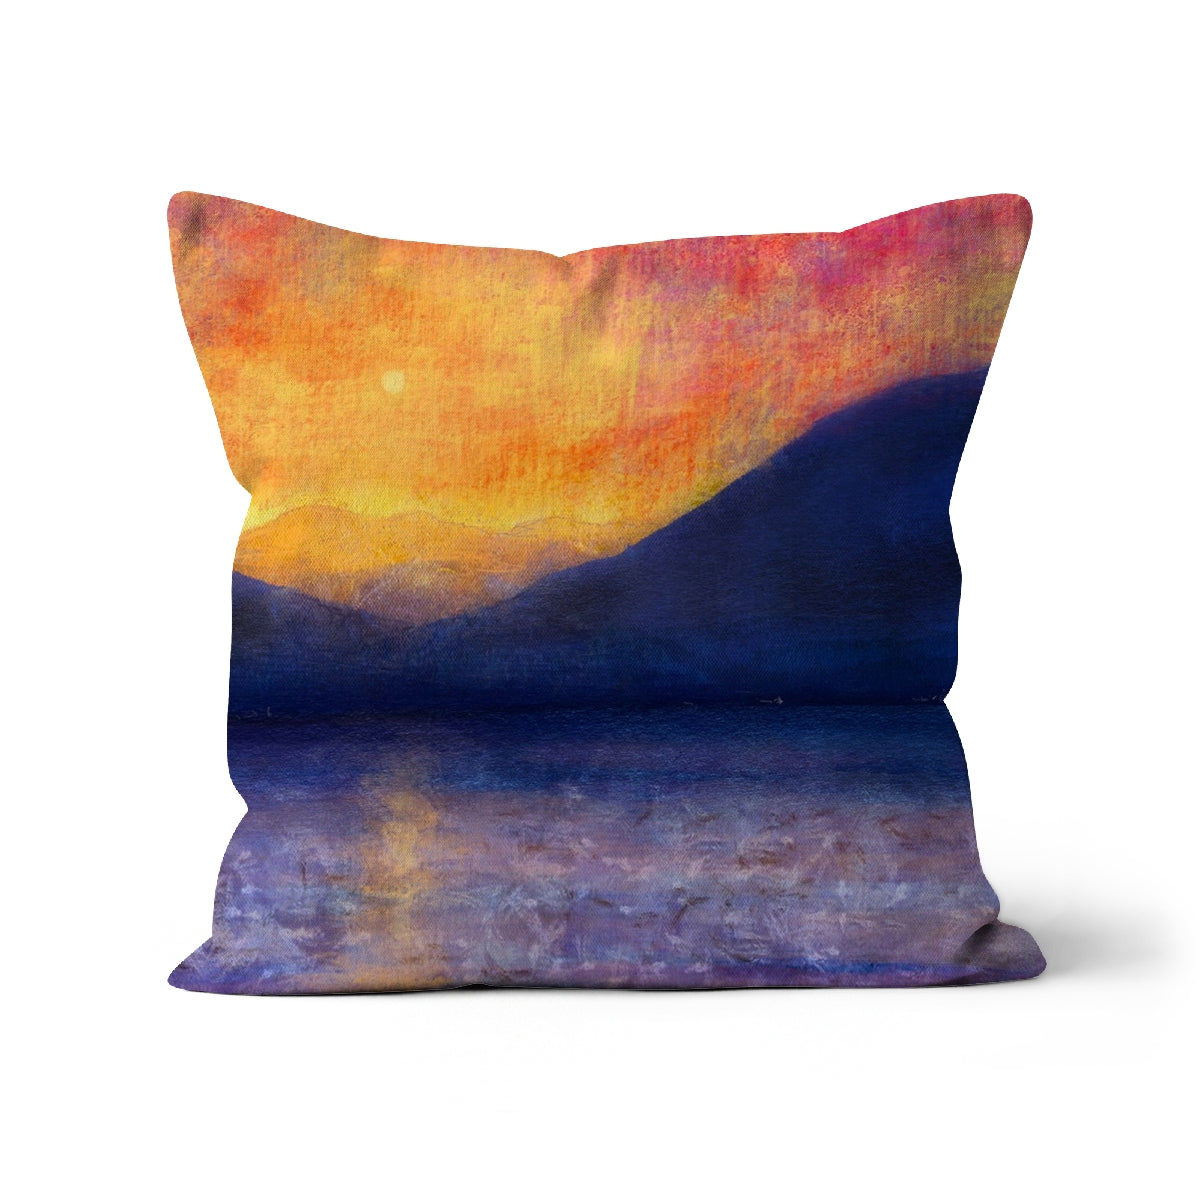 Sunset Approaching Mull Art Gifts Cushion-Cushions-Hebridean Islands Art Gallery-Canvas-18"x18"-Paintings, Prints, Homeware, Art Gifts From Scotland By Scottish Artist Kevin Hunter